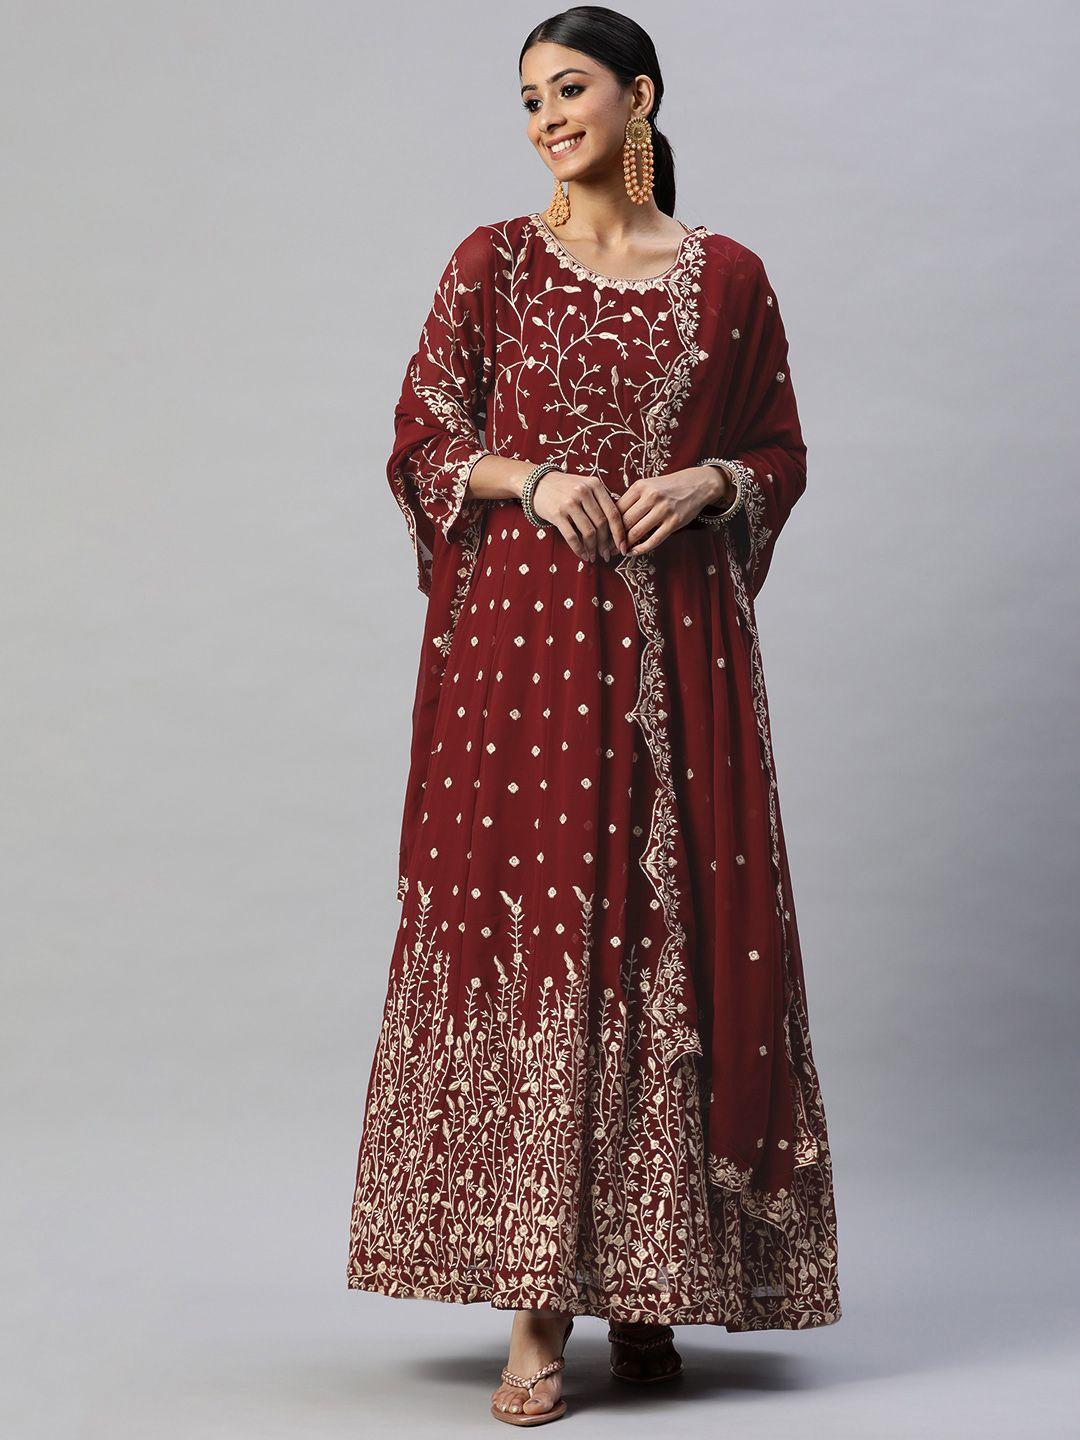 Readiprint Fashions Maroon & Golden Embroidered Semi-Stitched Dress Material